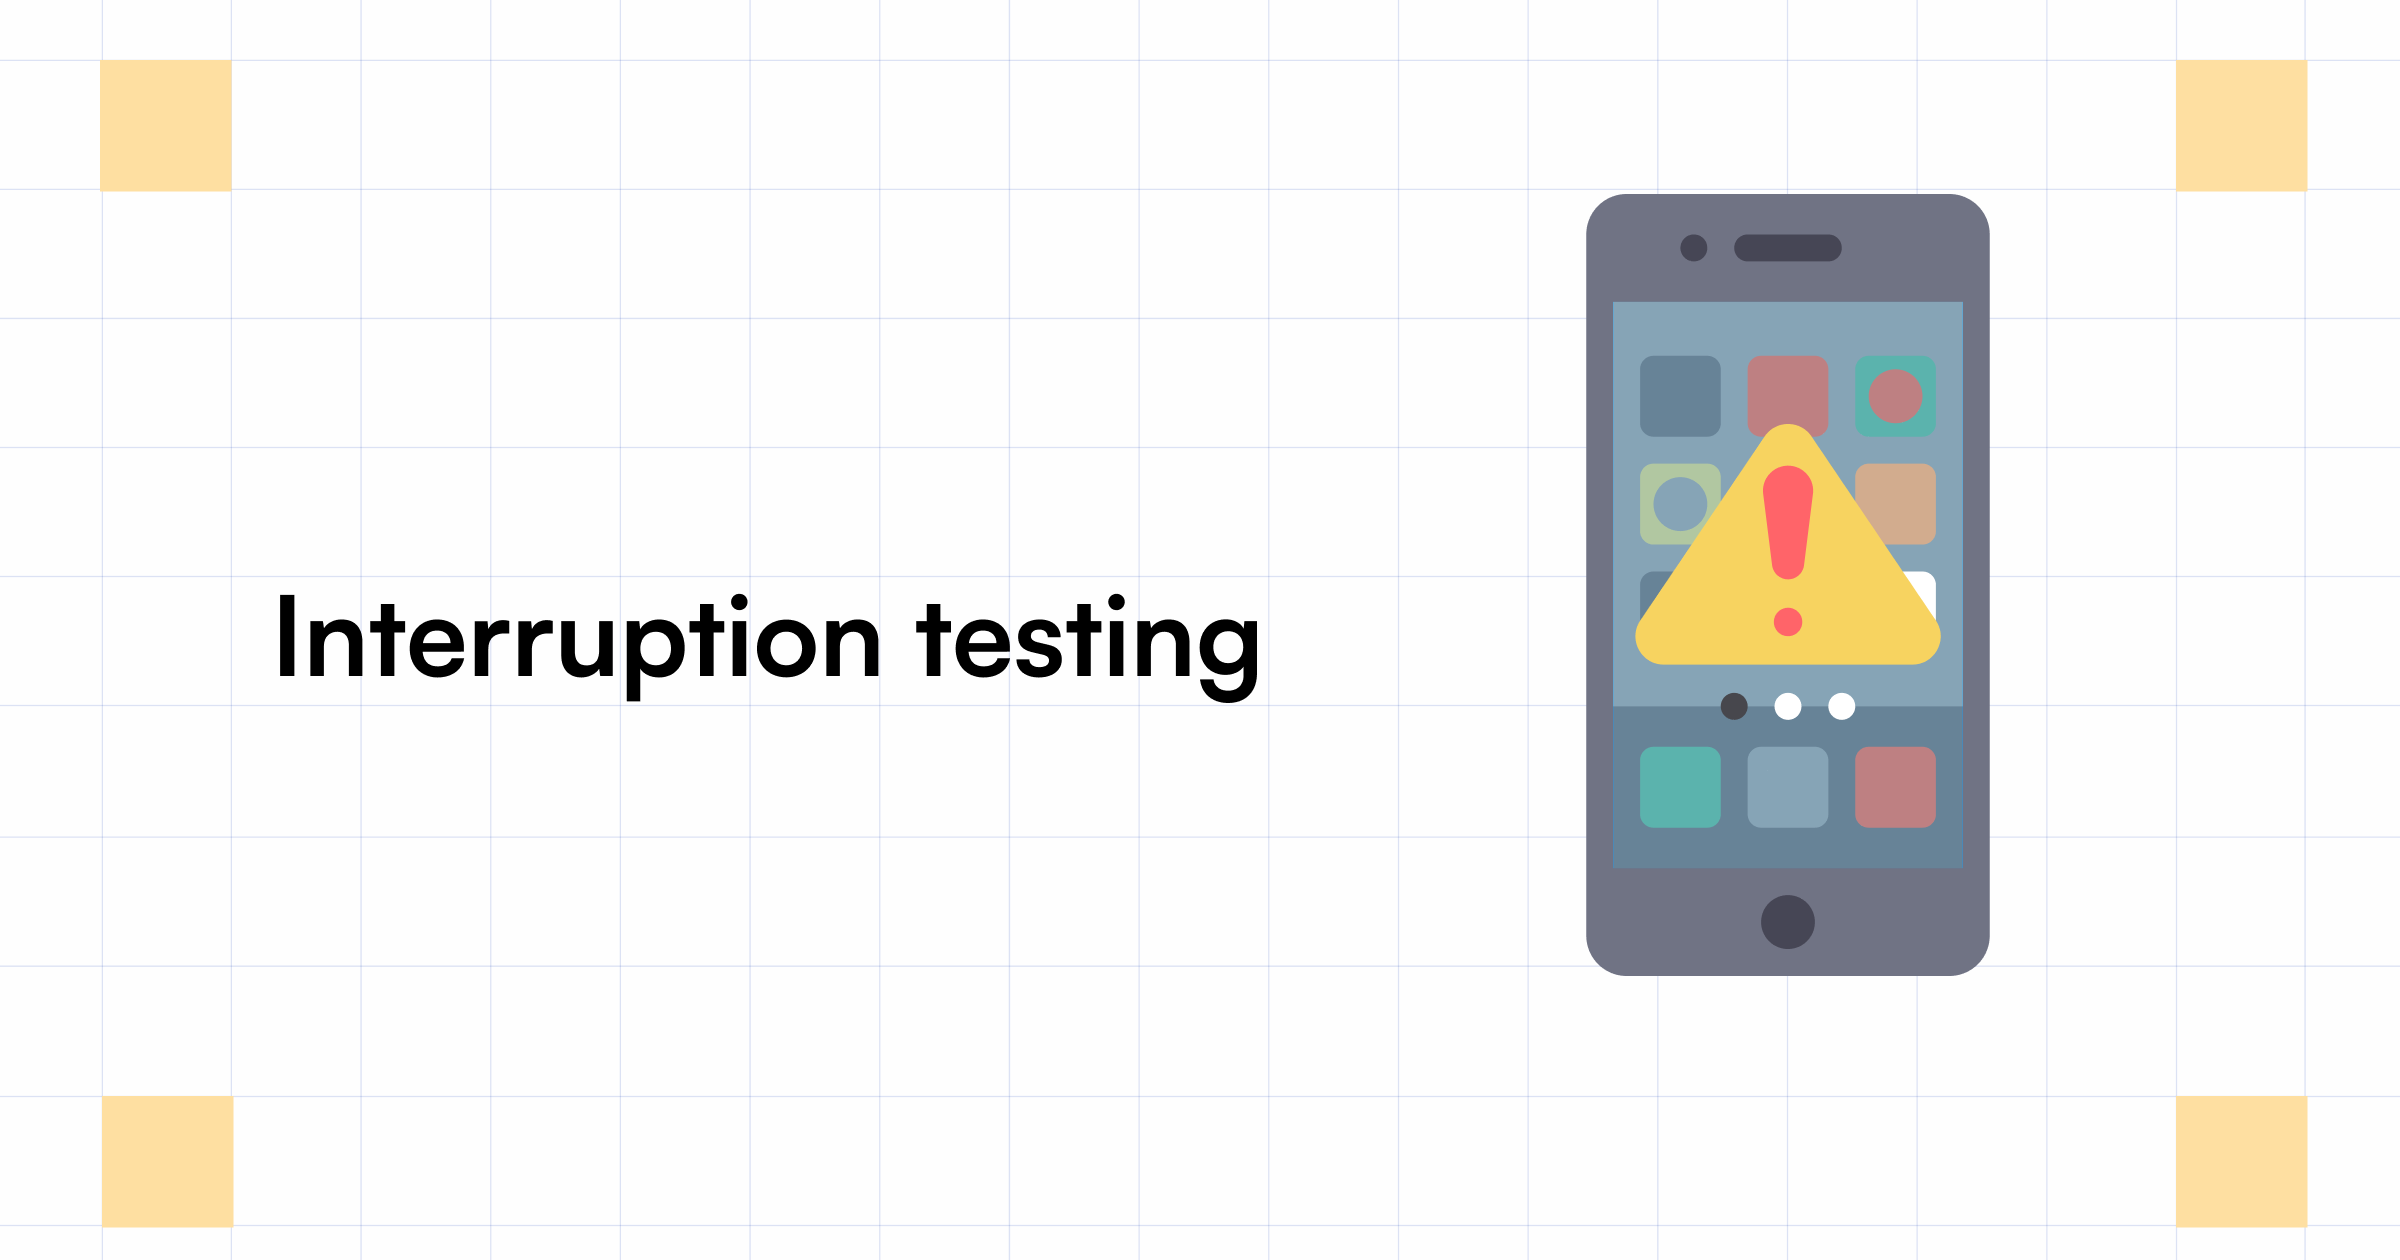 Interruption Testing - How To Perform In Mobile Applications